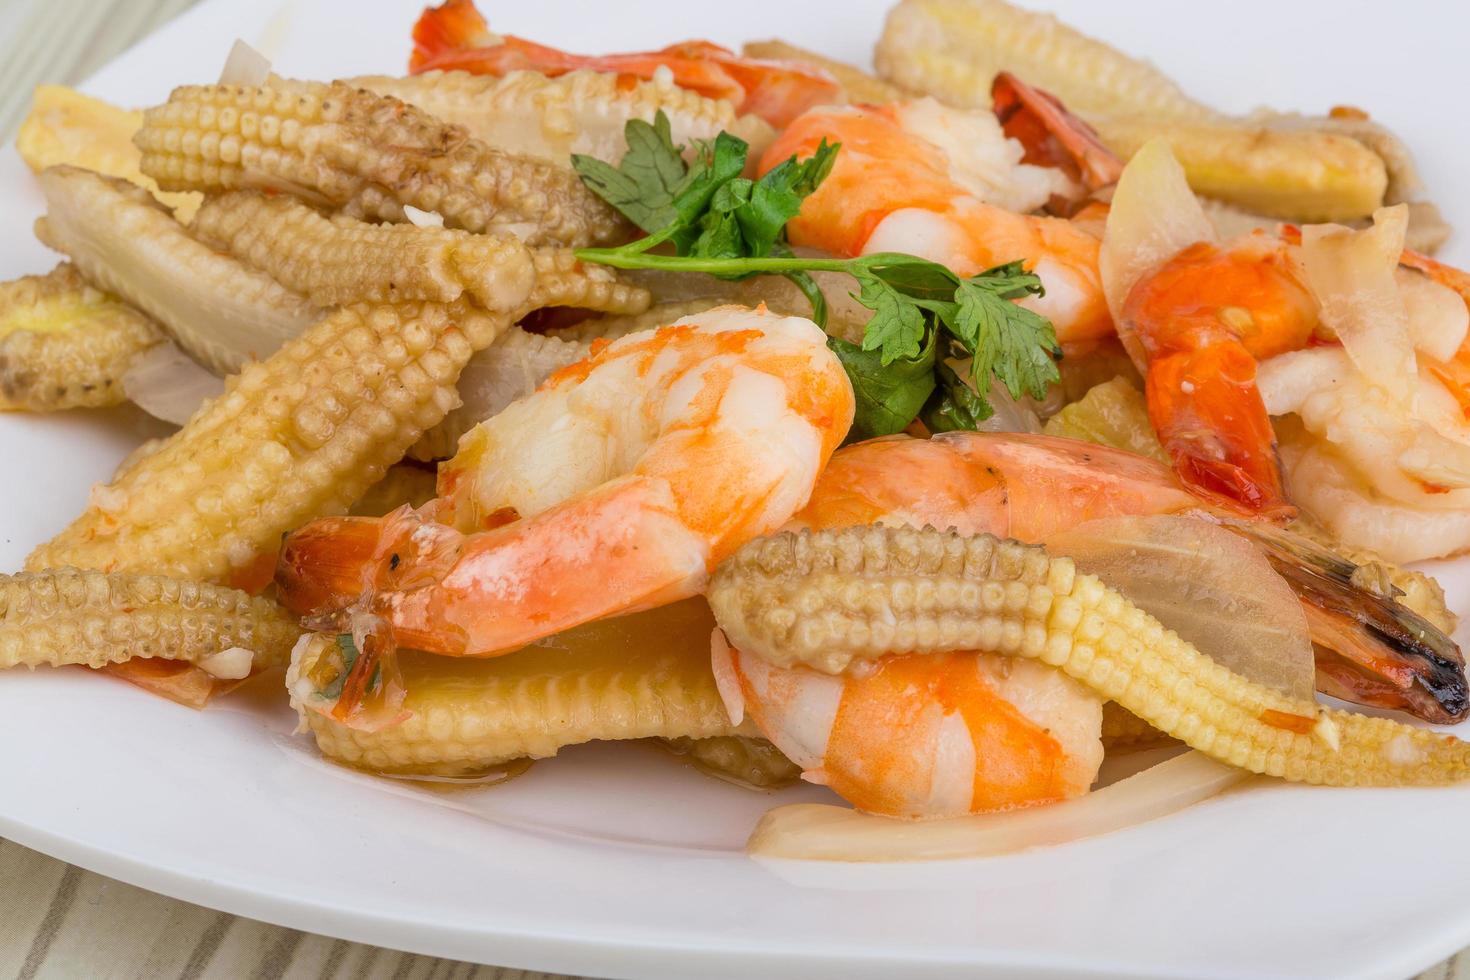 Shrimp and corn salad on the plate and wooden background photo